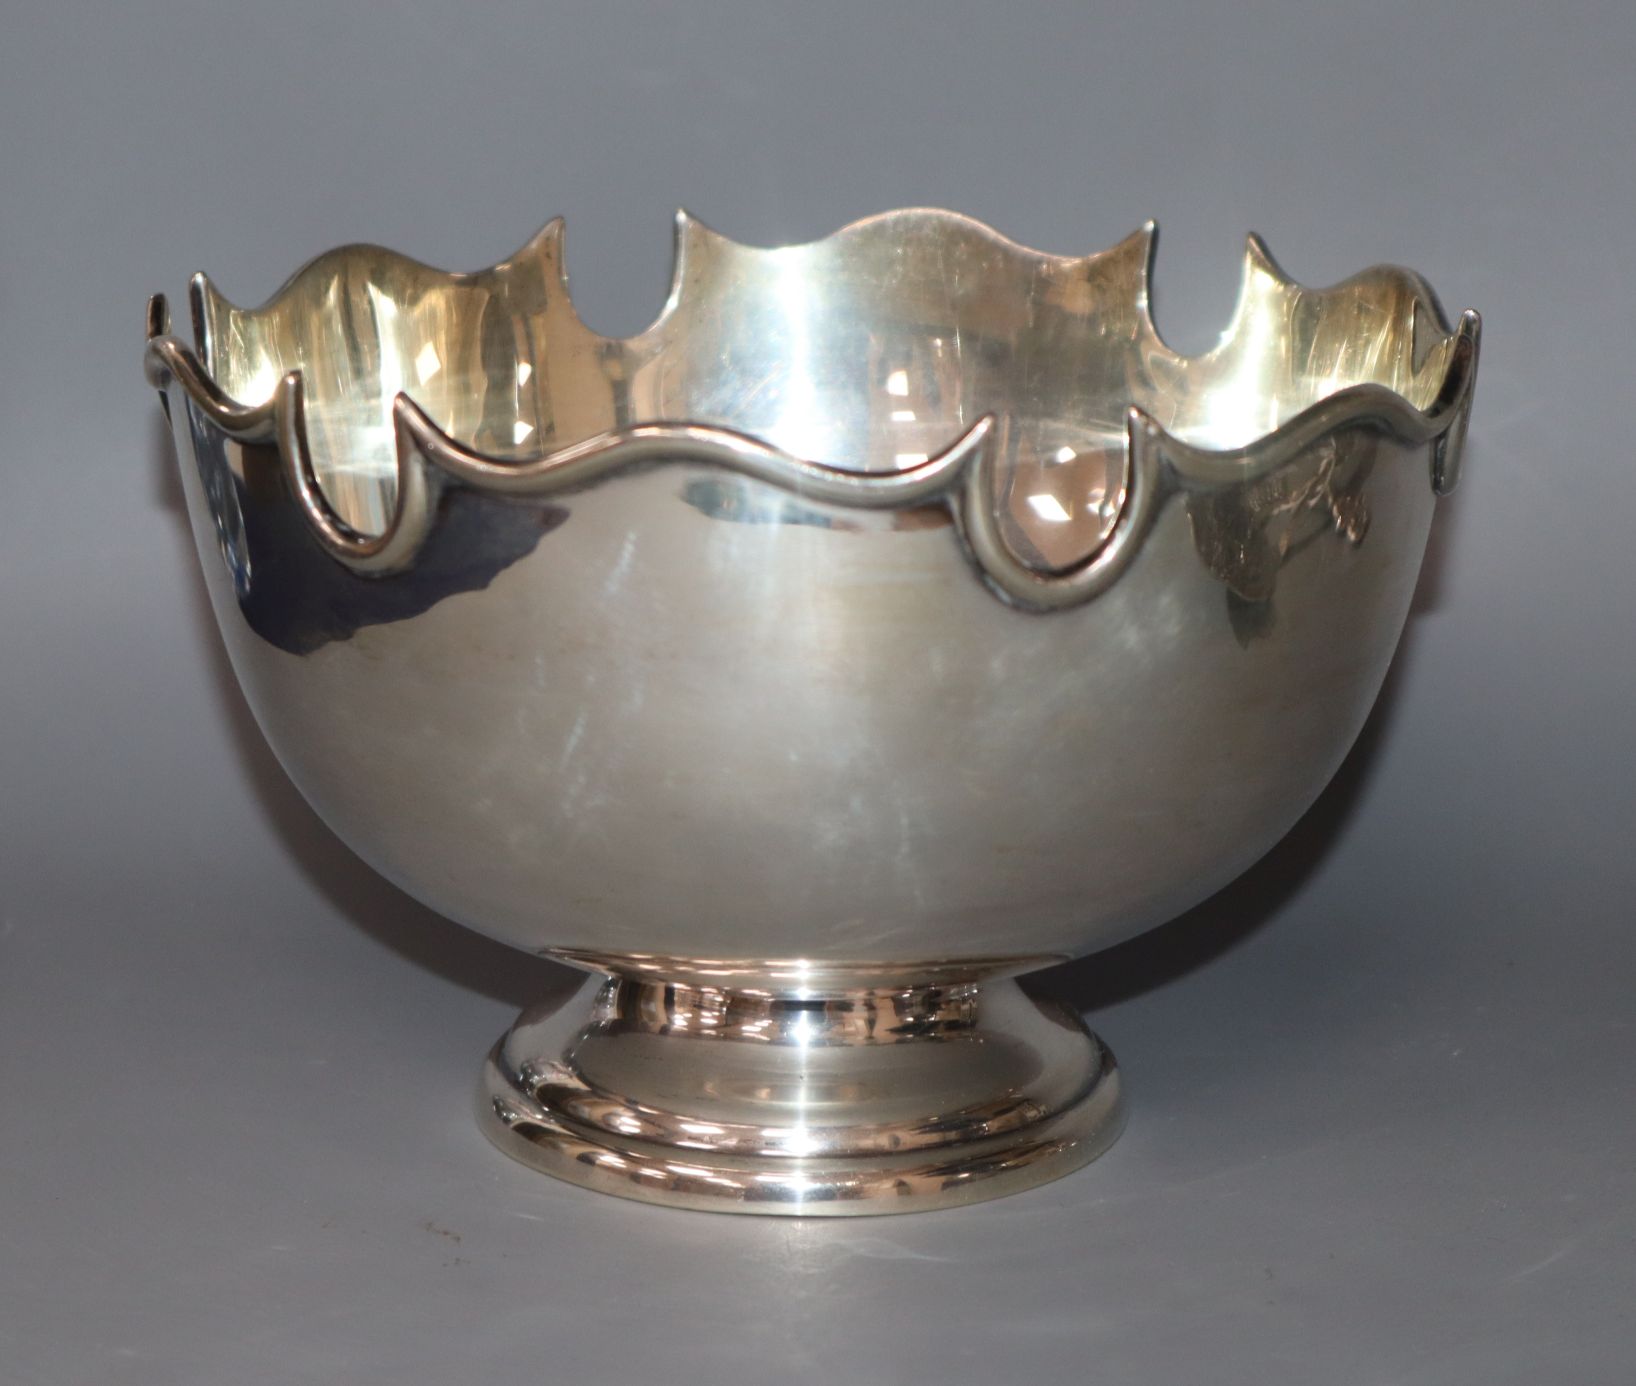 An Edwardian Scottish silver Monteith style rose bowl, Edinburgh 1907, by Hamilton and Inches, 15.